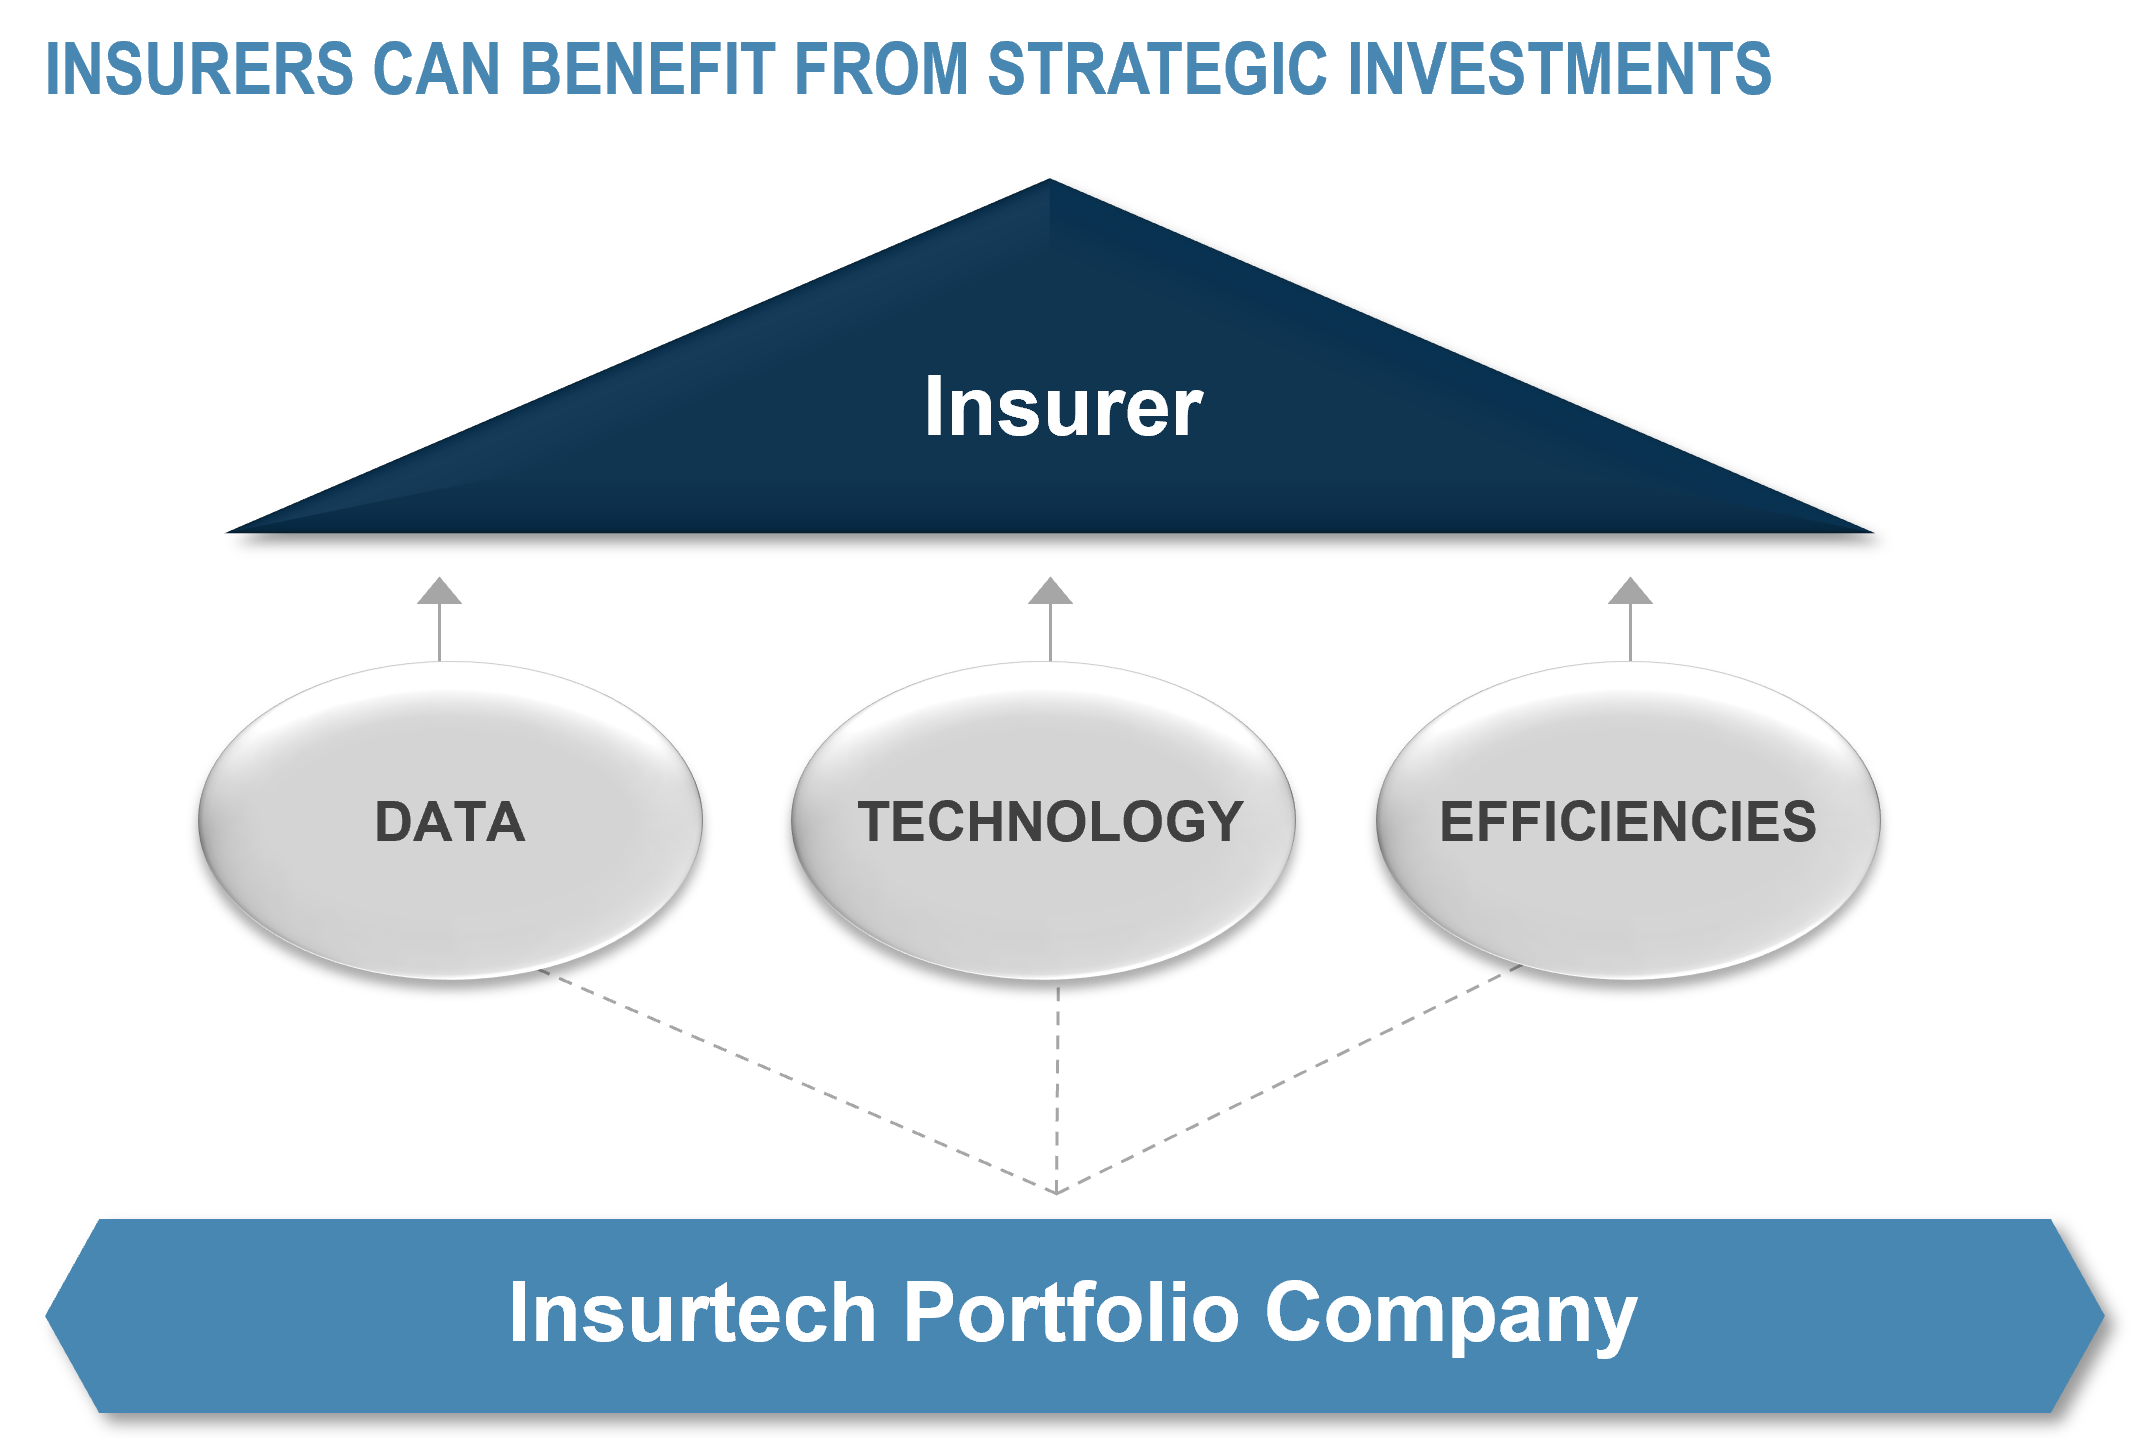 Insurers can benefit from strategic investments